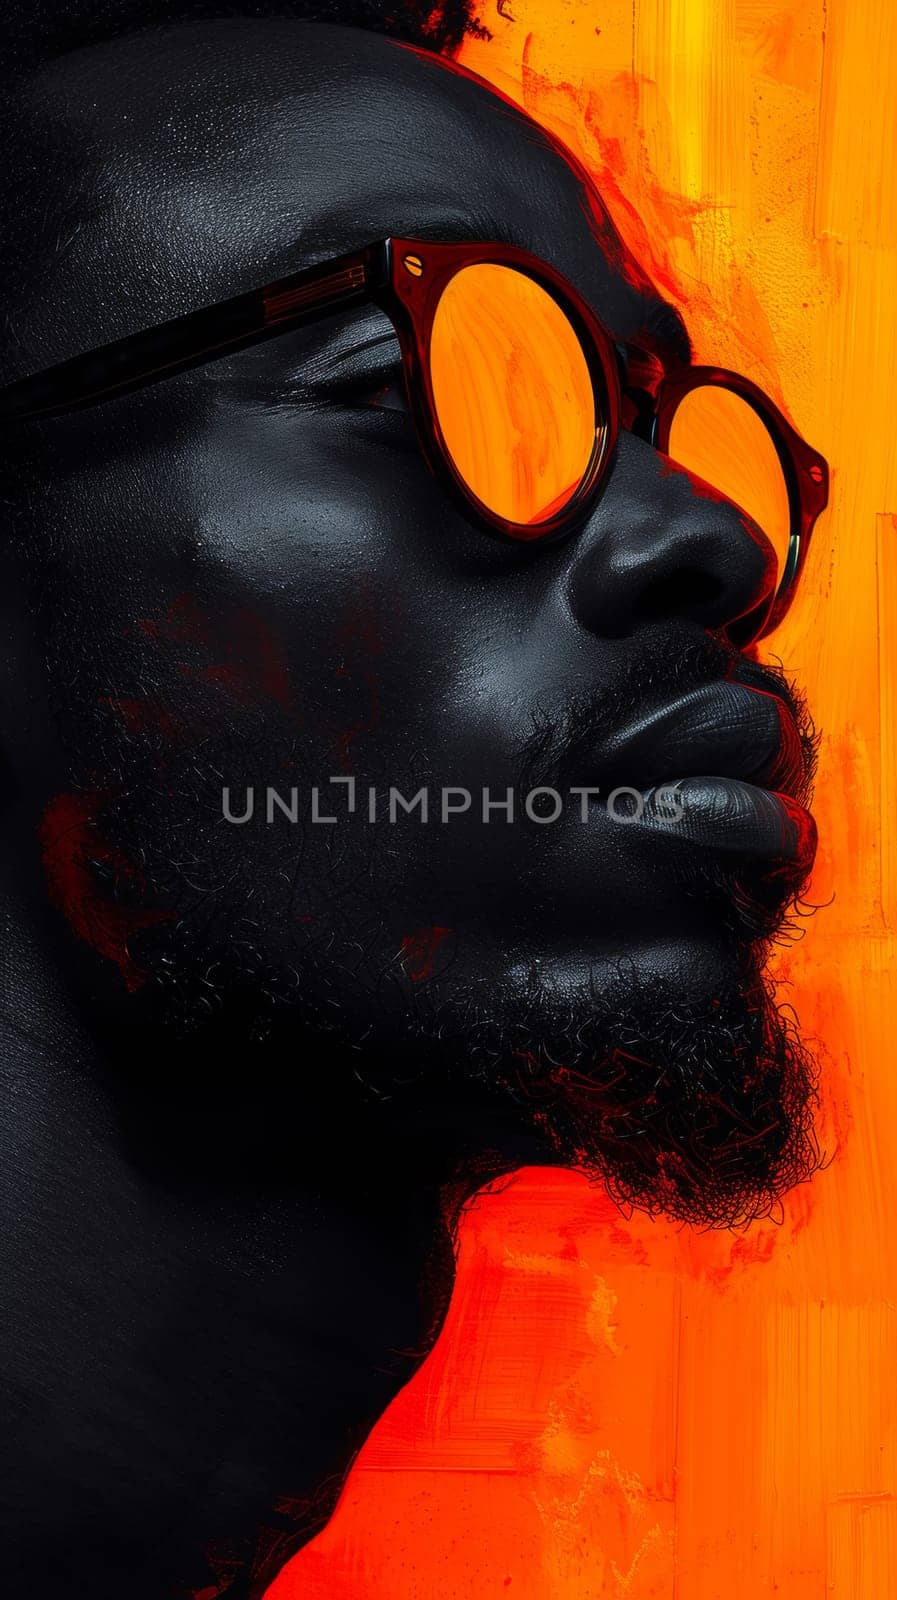 A close up of a black man with glasses and orange background